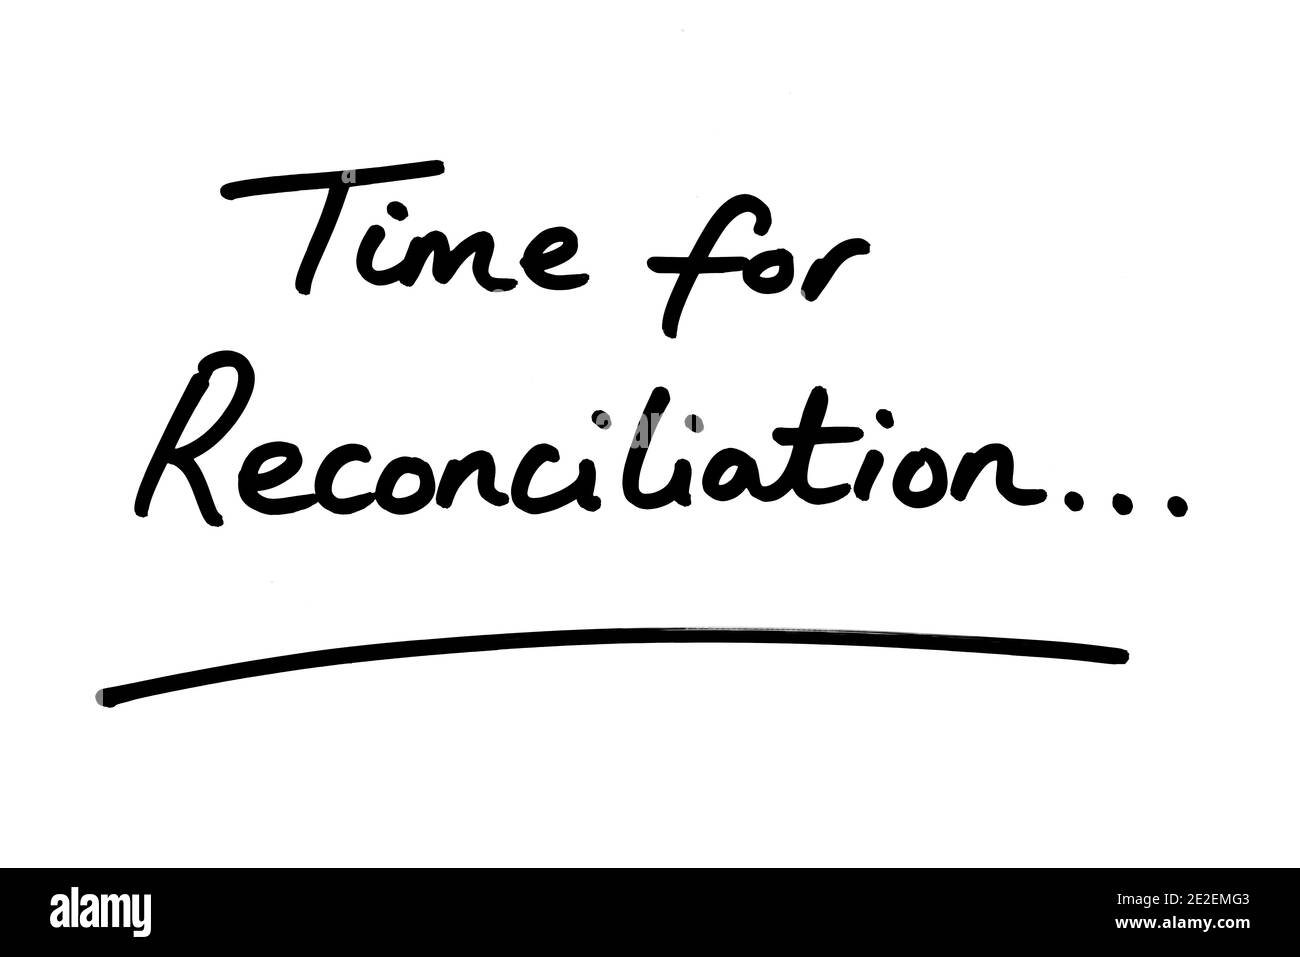 Time for Reconciliation… handwritten on a white background. Stock Photo